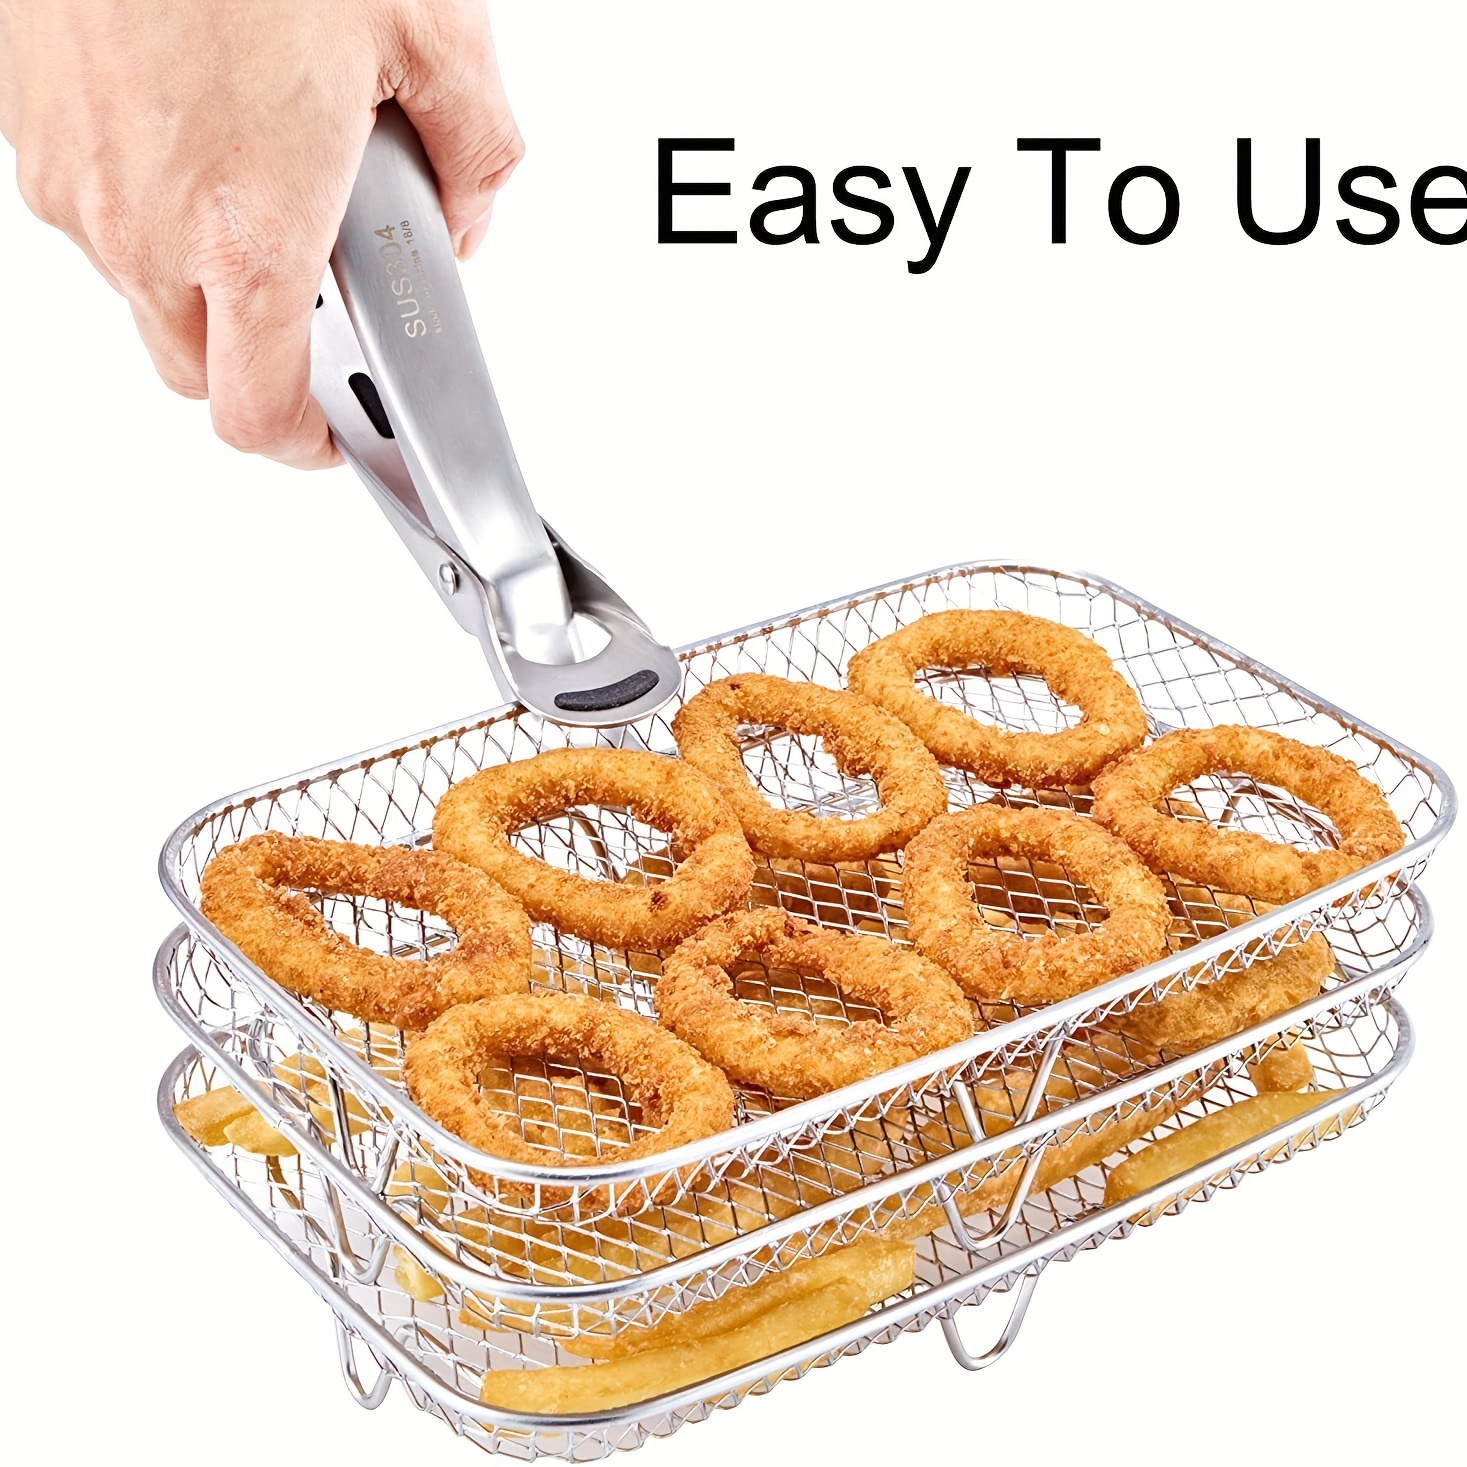 The Universal Air Frying Oven Tray